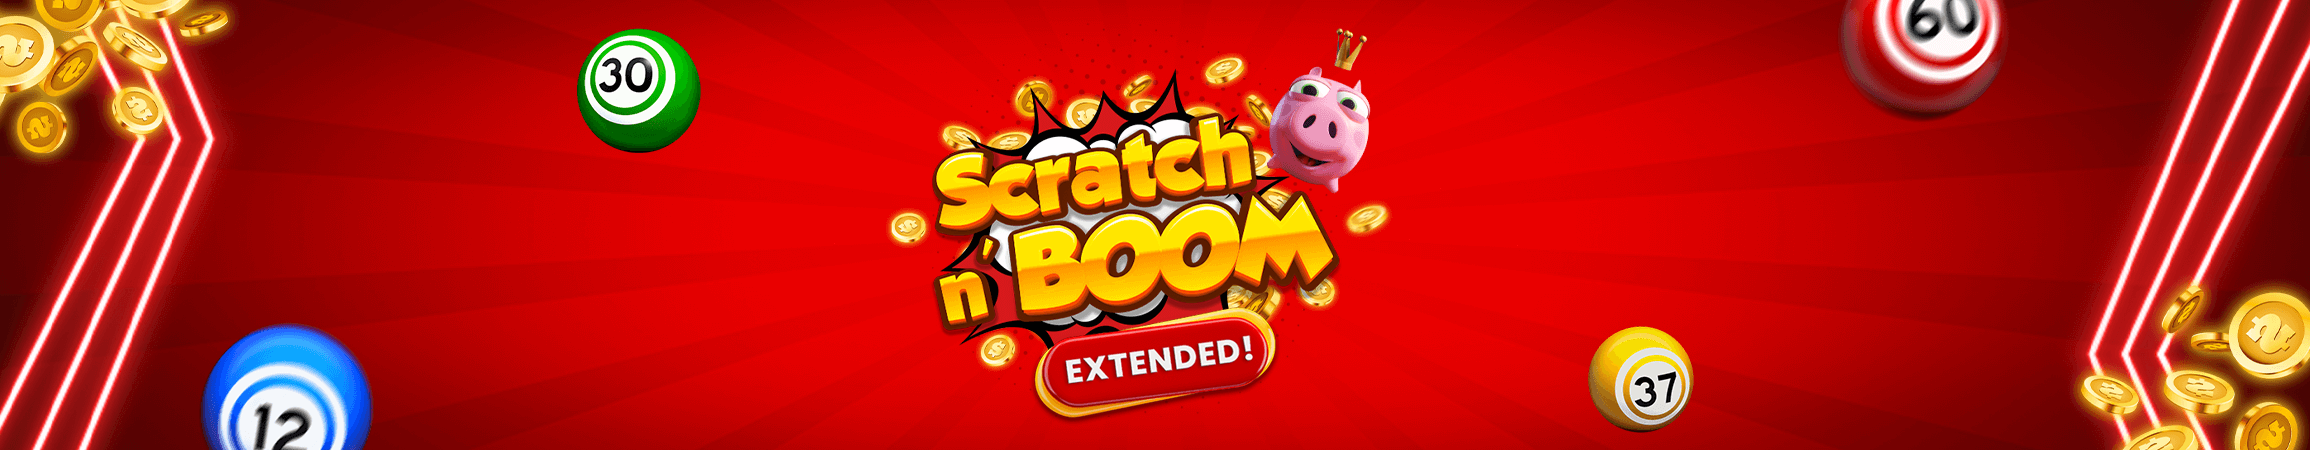 FBM® lucky scratches continue this October with a Scratch and Boom extension!